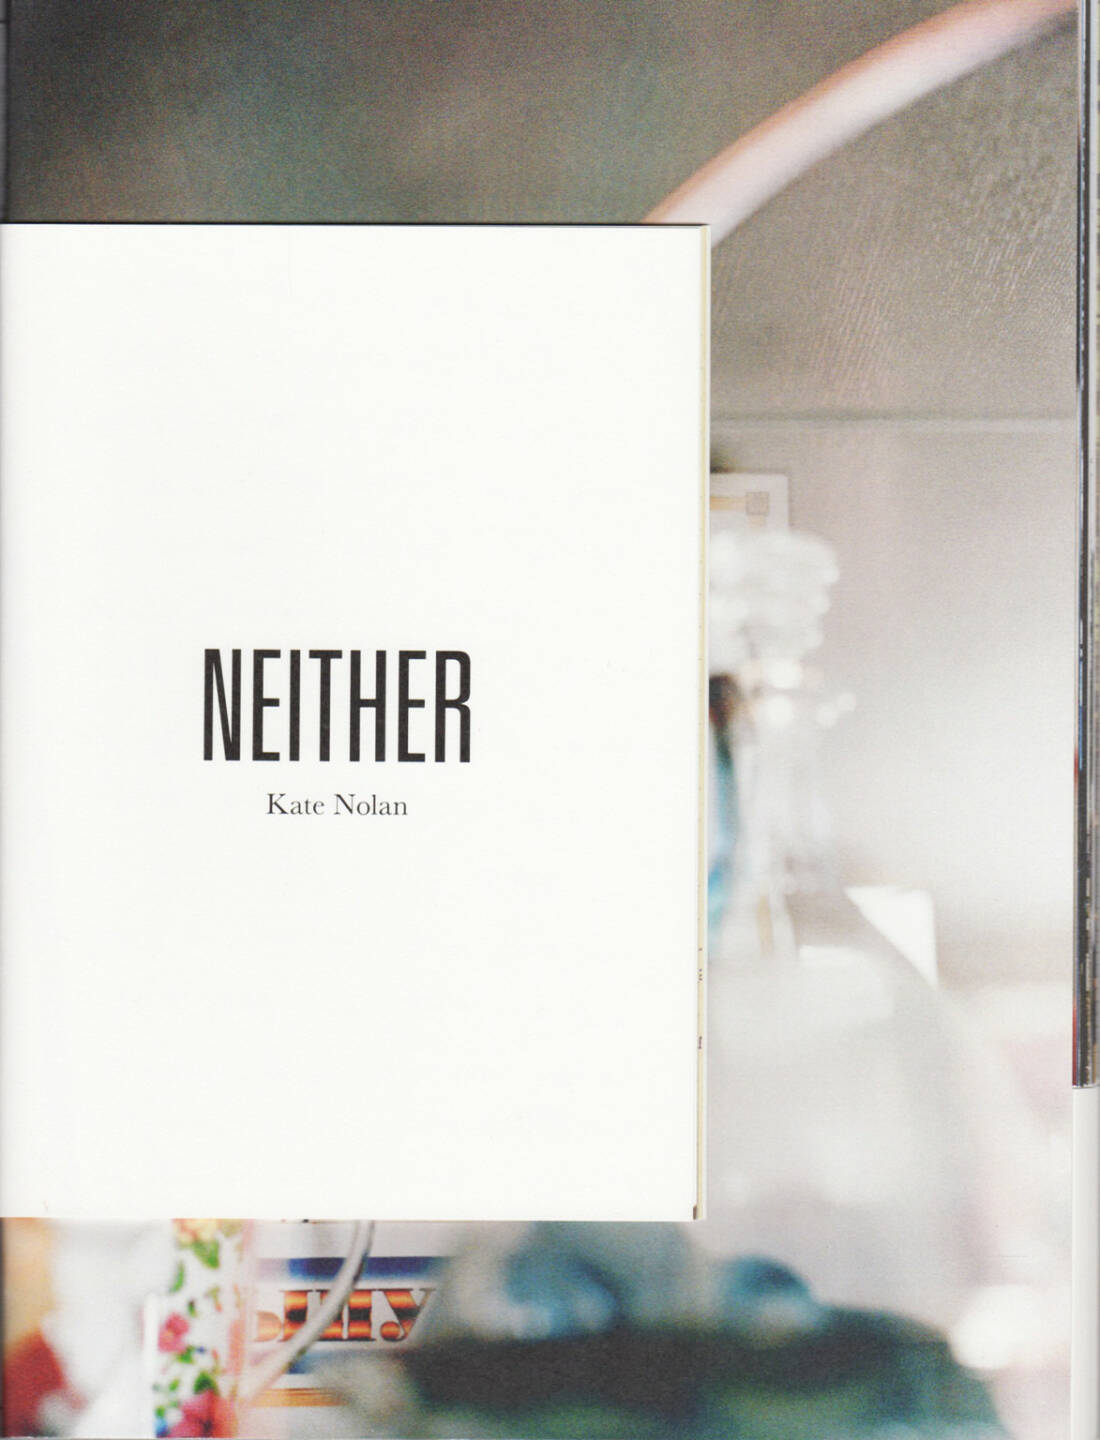 Kate Nolan - Either, Self published, 2014, Cover - http://josefchladek.com/book/kate_nolan_-_neither